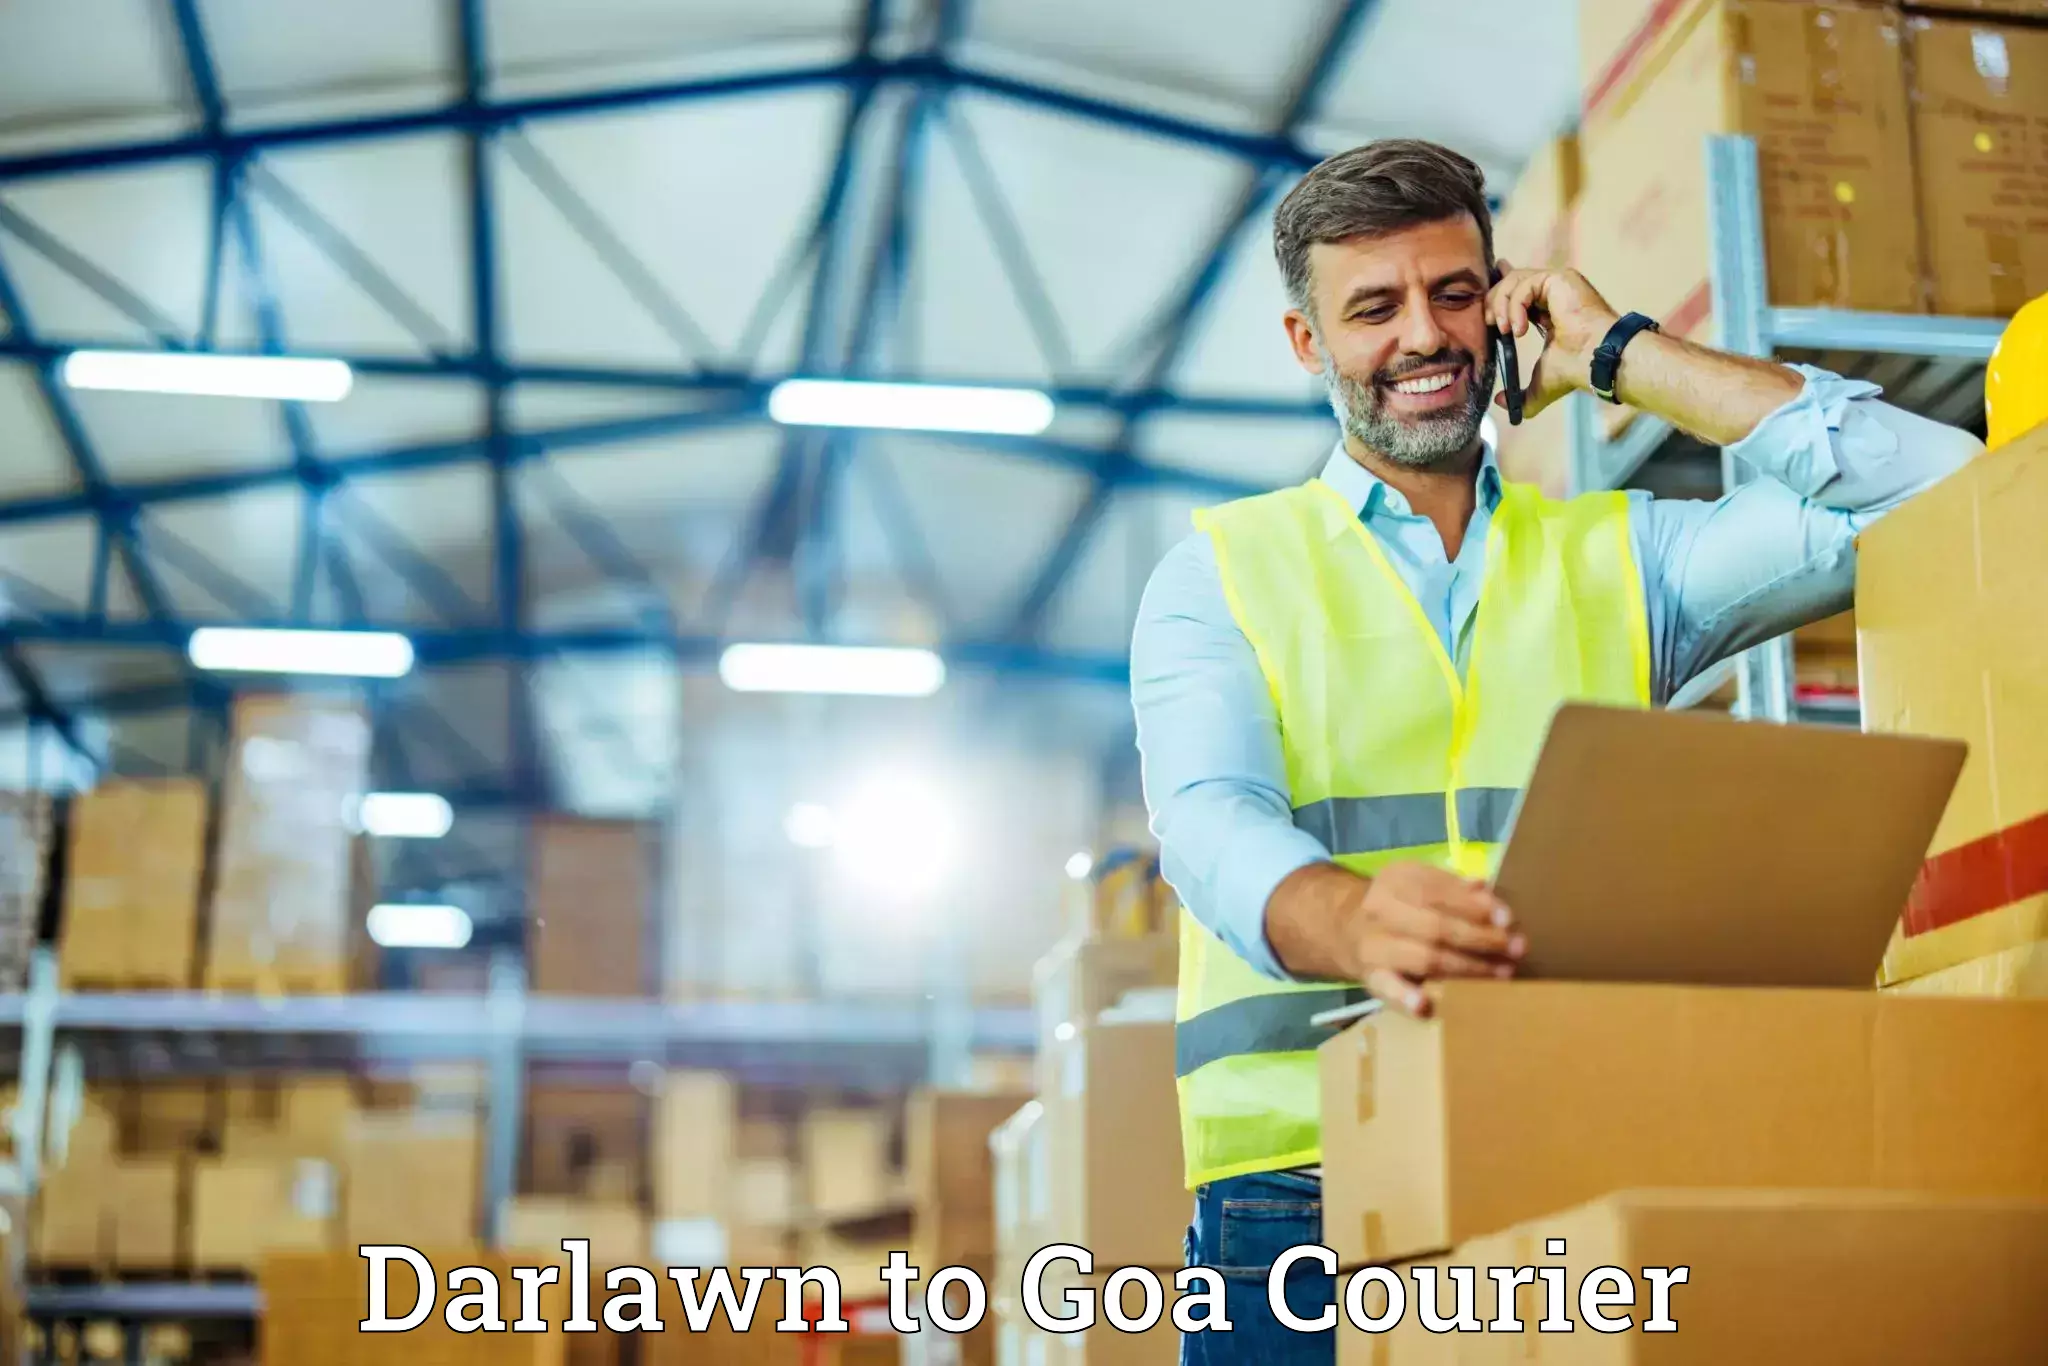 Furniture transport company Darlawn to South Goa